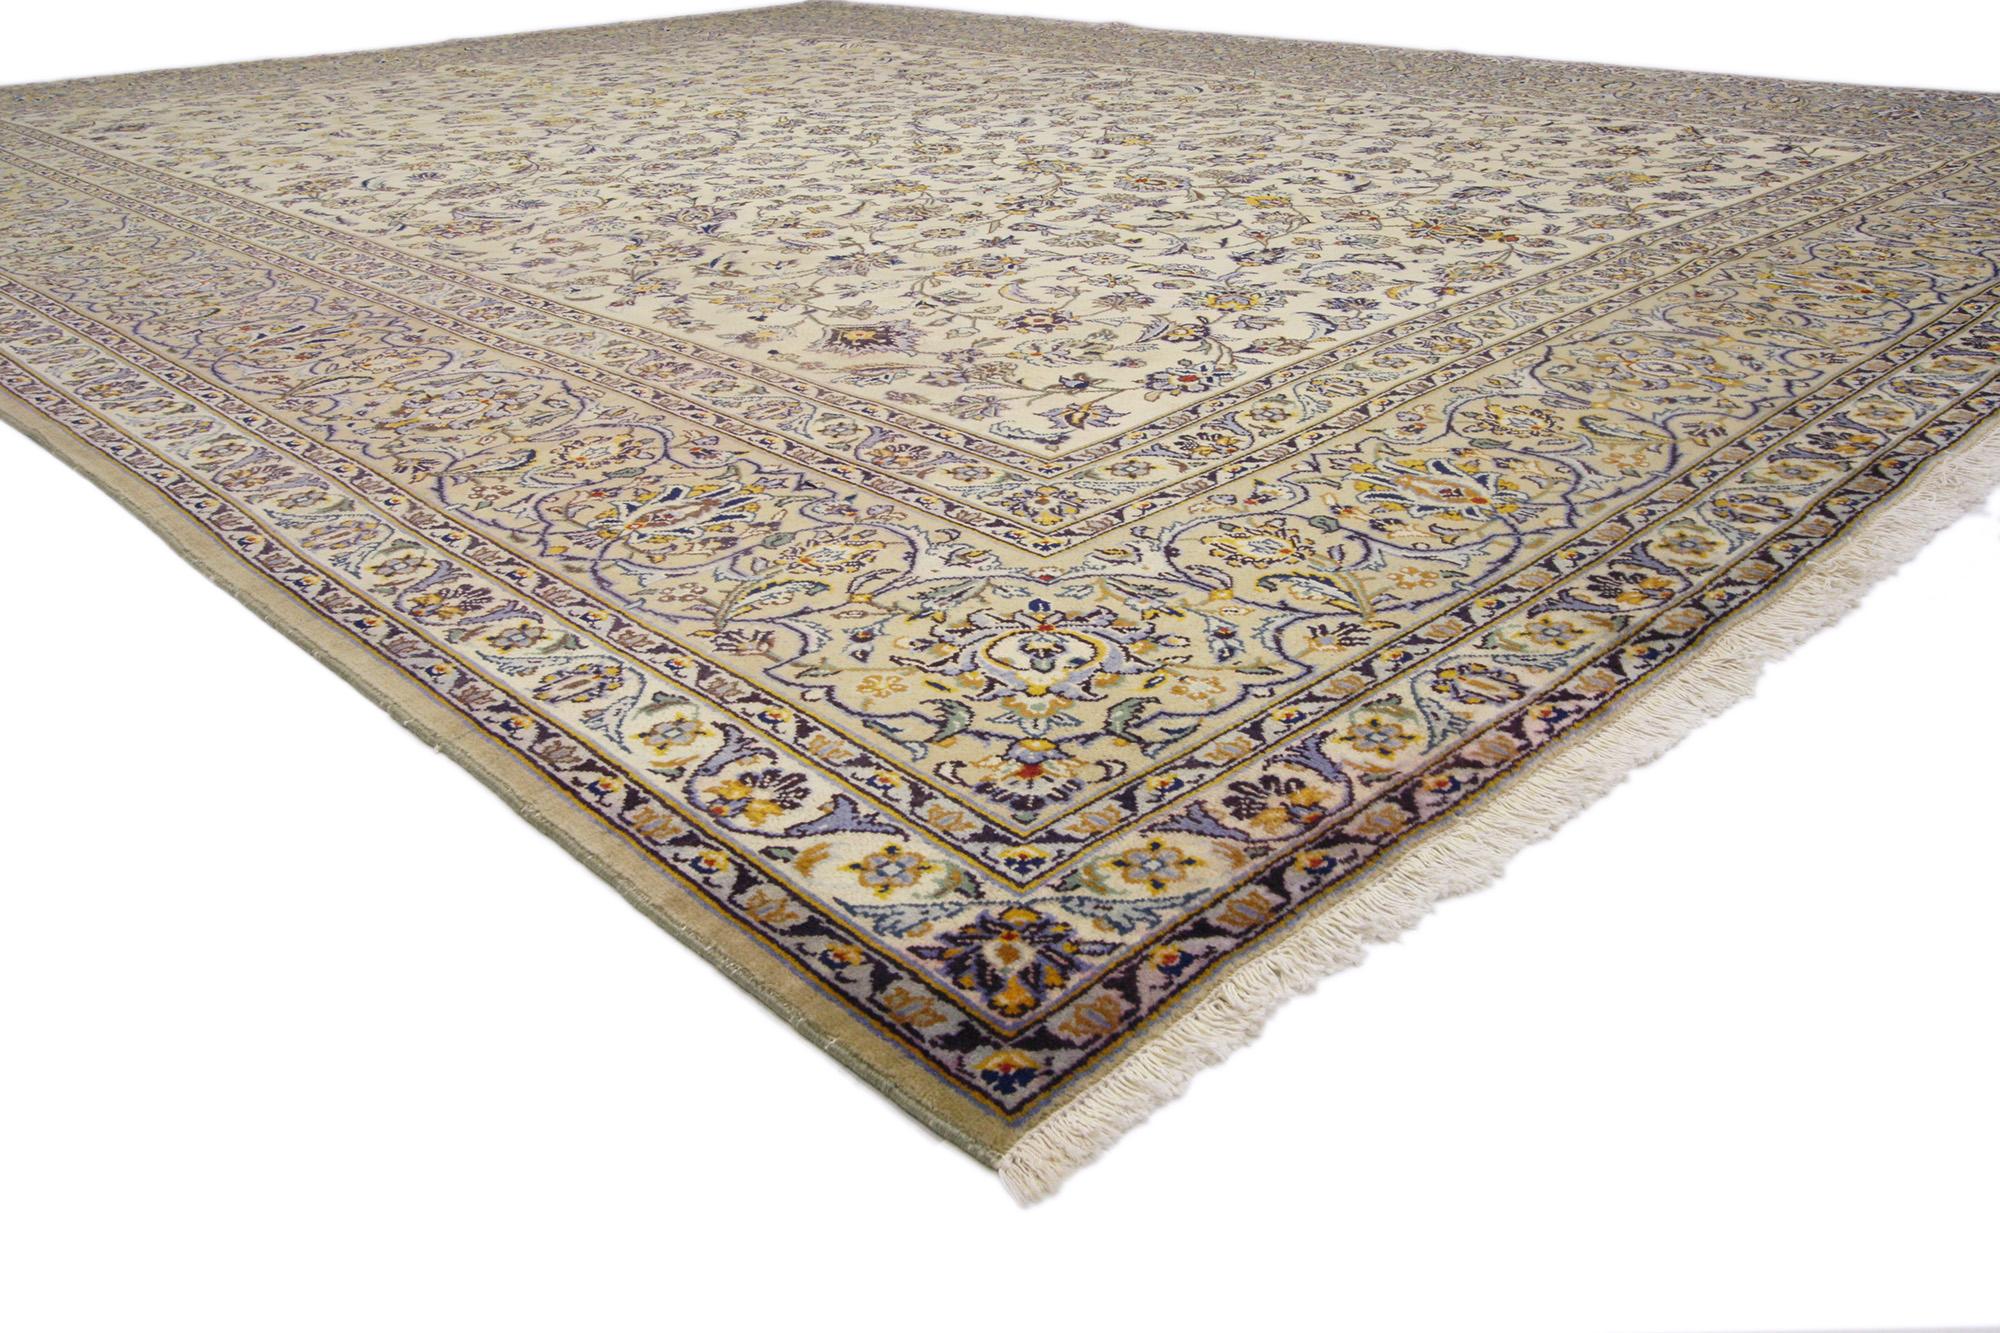 76372 Vintage Persian Kashan Rug, 10'02 x 13'01.
Unveiling an ambiance of timeless elegance and warmth, this hand-knotted wool vintage Persian Kashan rug beckons with refined tranquility. A symphony of sophistication, it showcases an arabesque